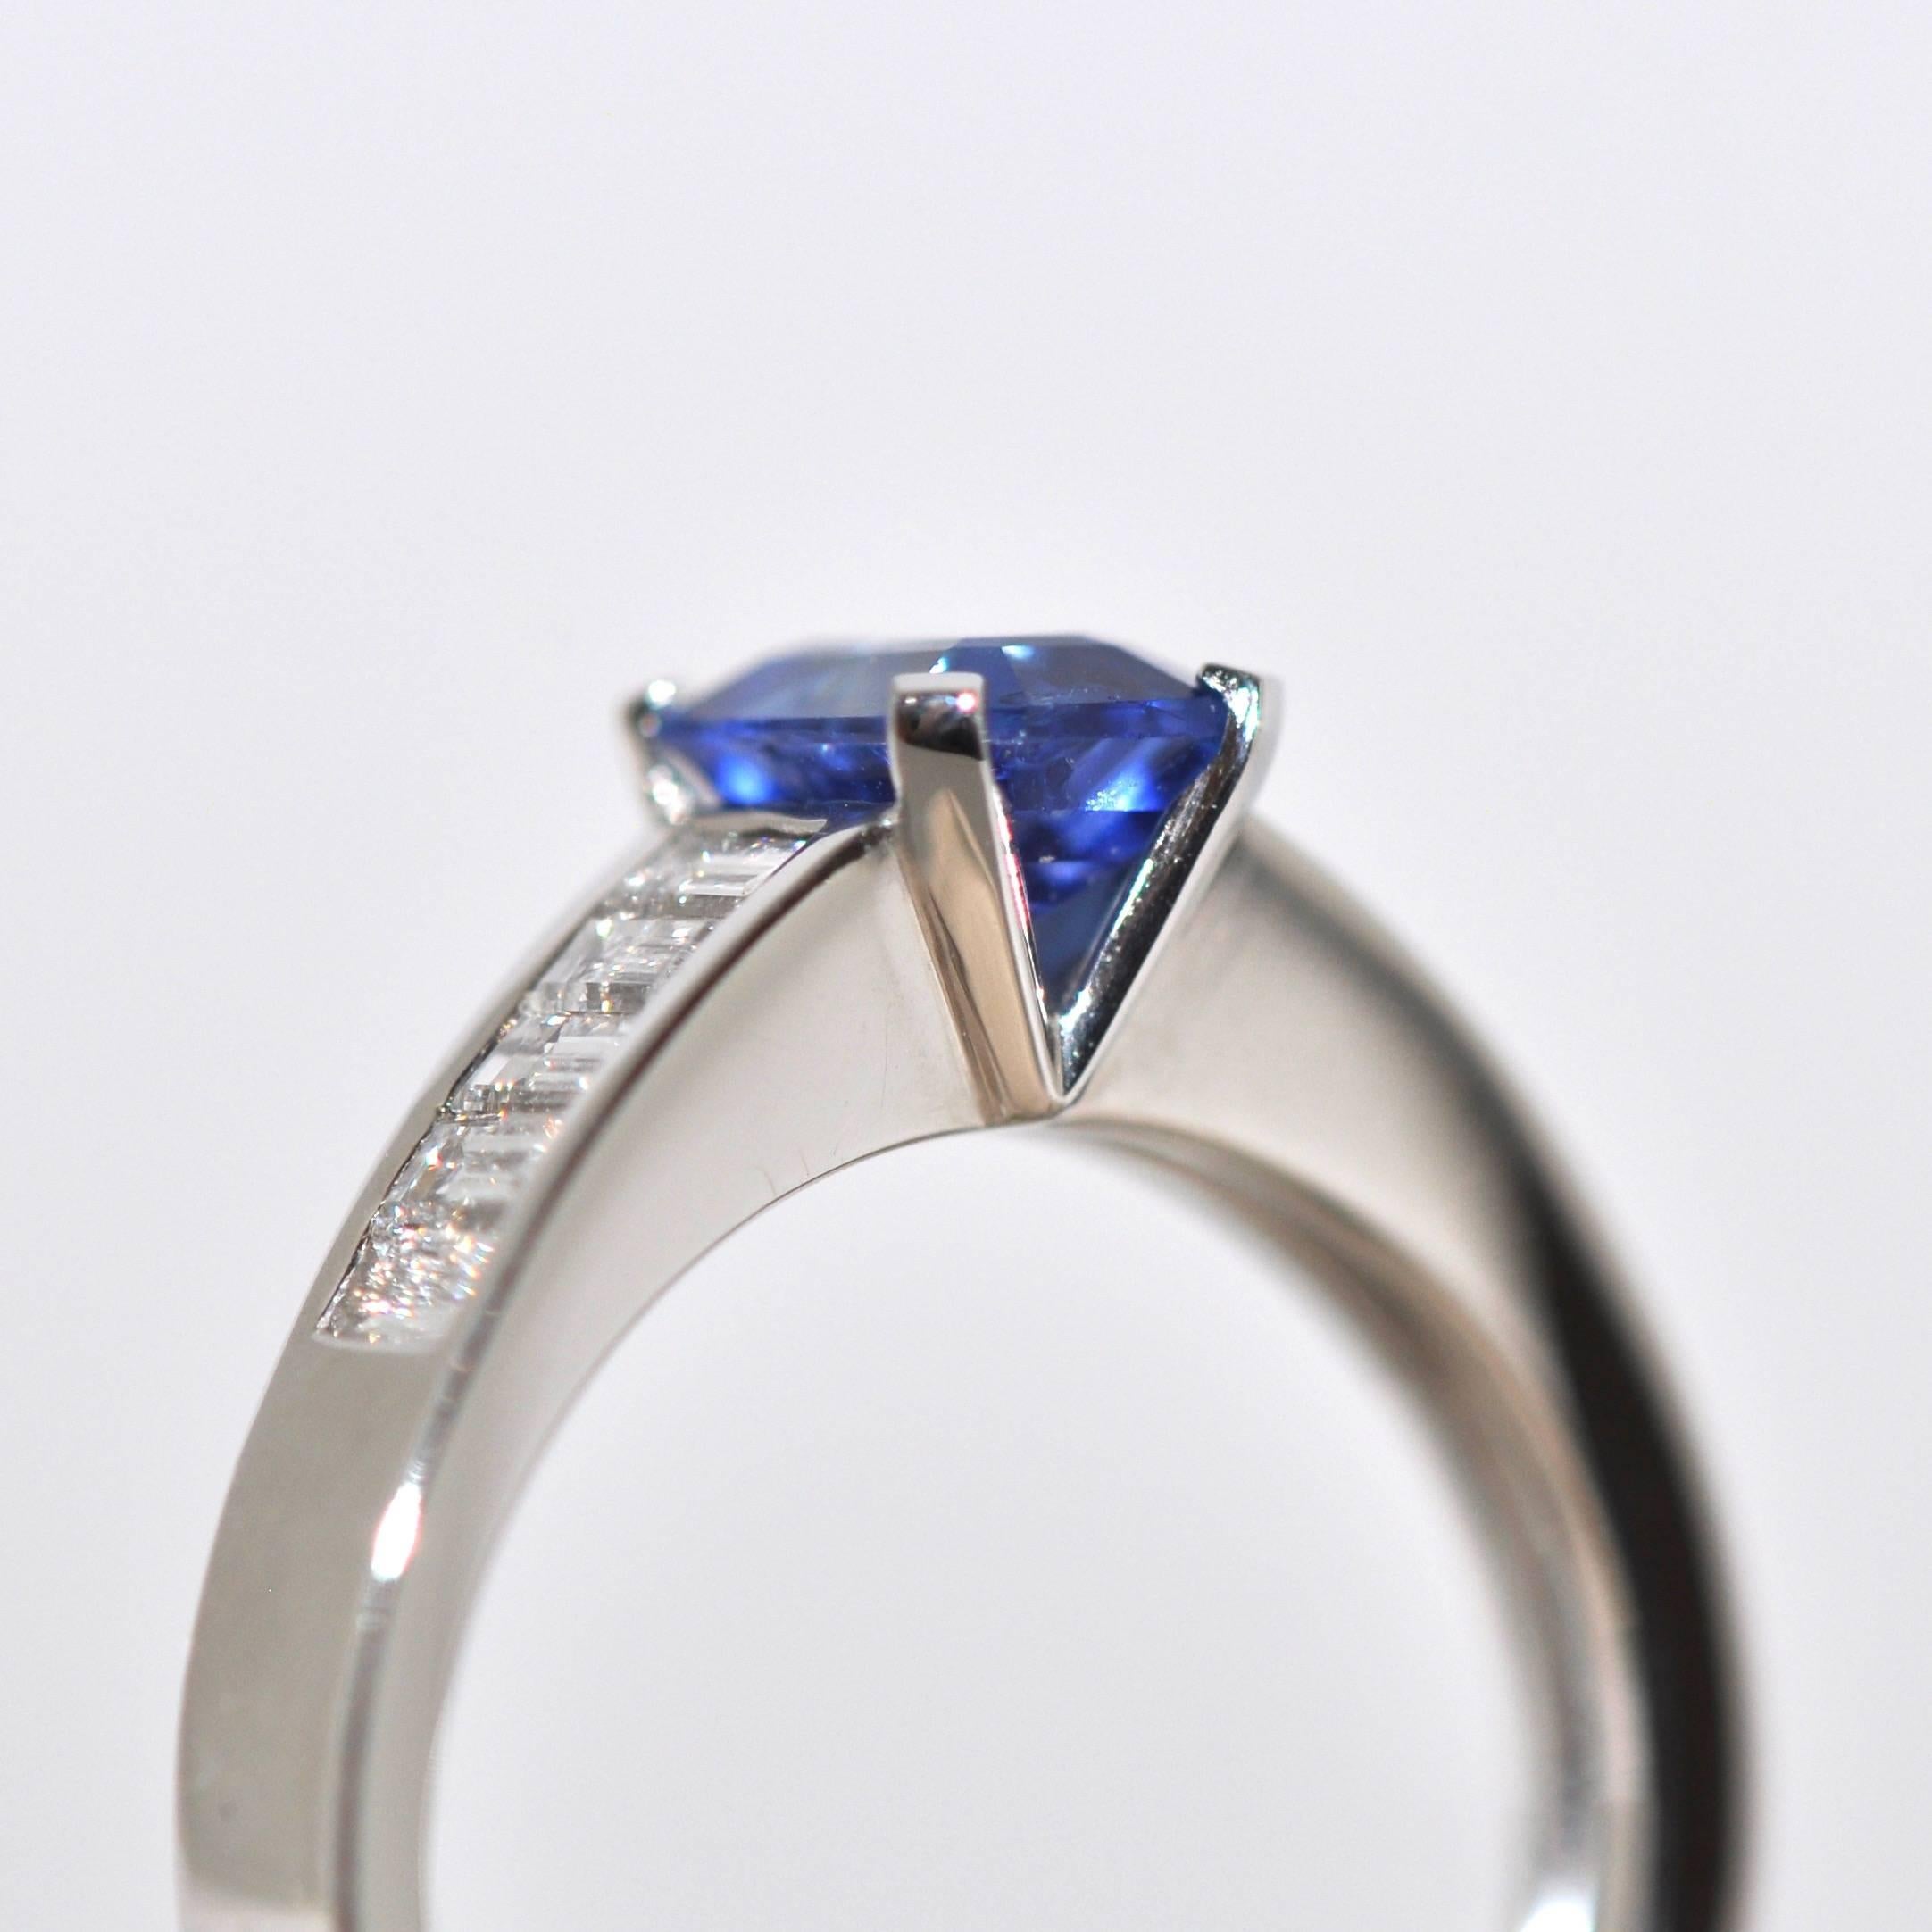 Discover this Blue Sapphire and White Diamonds White Gold Ring.
Blue Sapphire 1.22 Carat
10 White Diamonds color F/G 0.59 Carat
White Gold 18 Carat
French Size 53 / US Size 6 1/4
